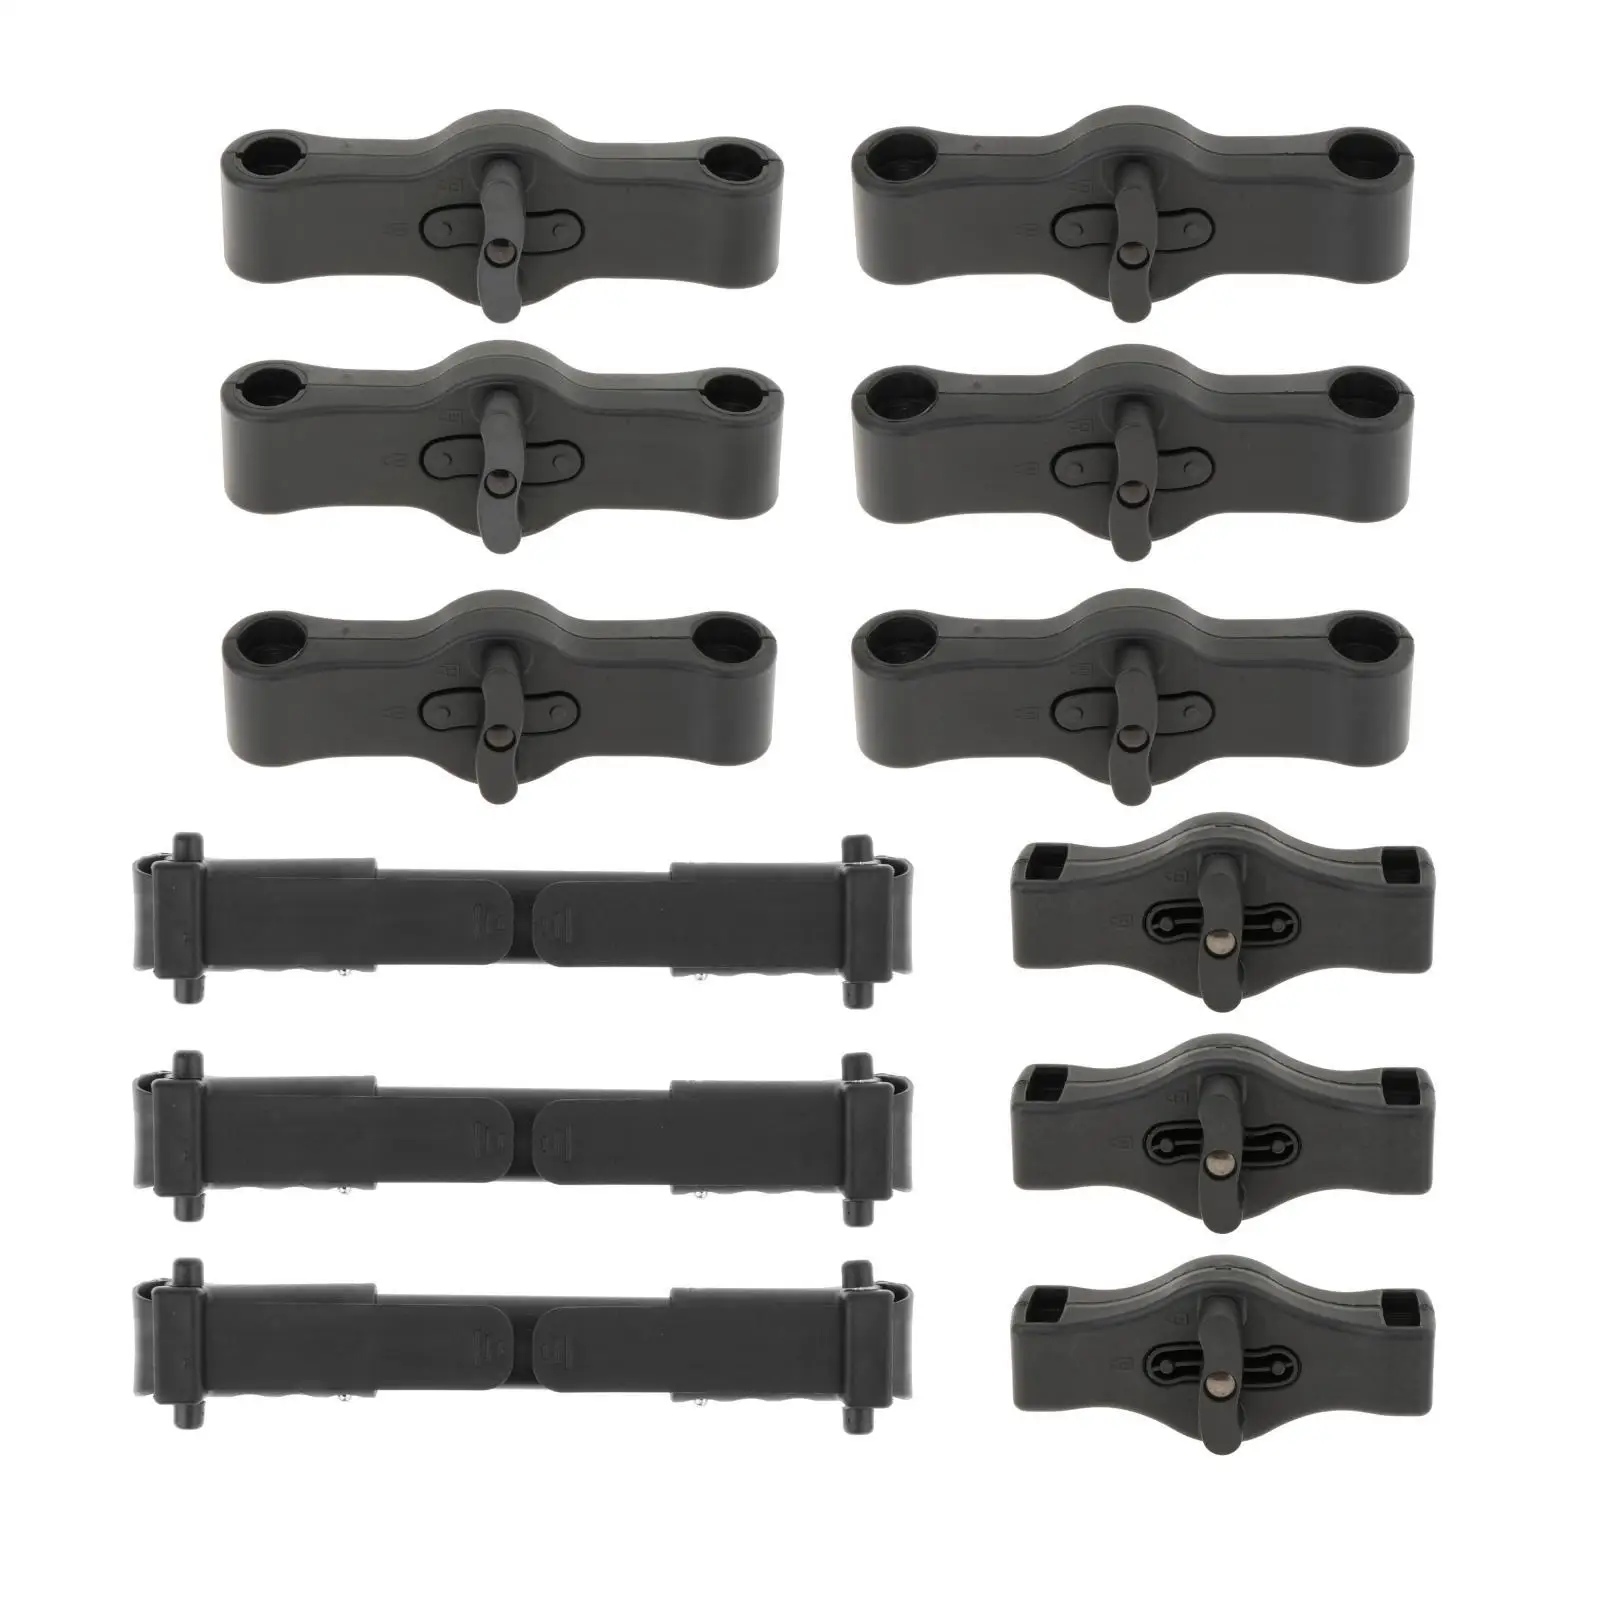 3x Pushchair Coupler Insert Dual Pram Strollers Connectors Attachment Portable Linker Twin Stroller Connector